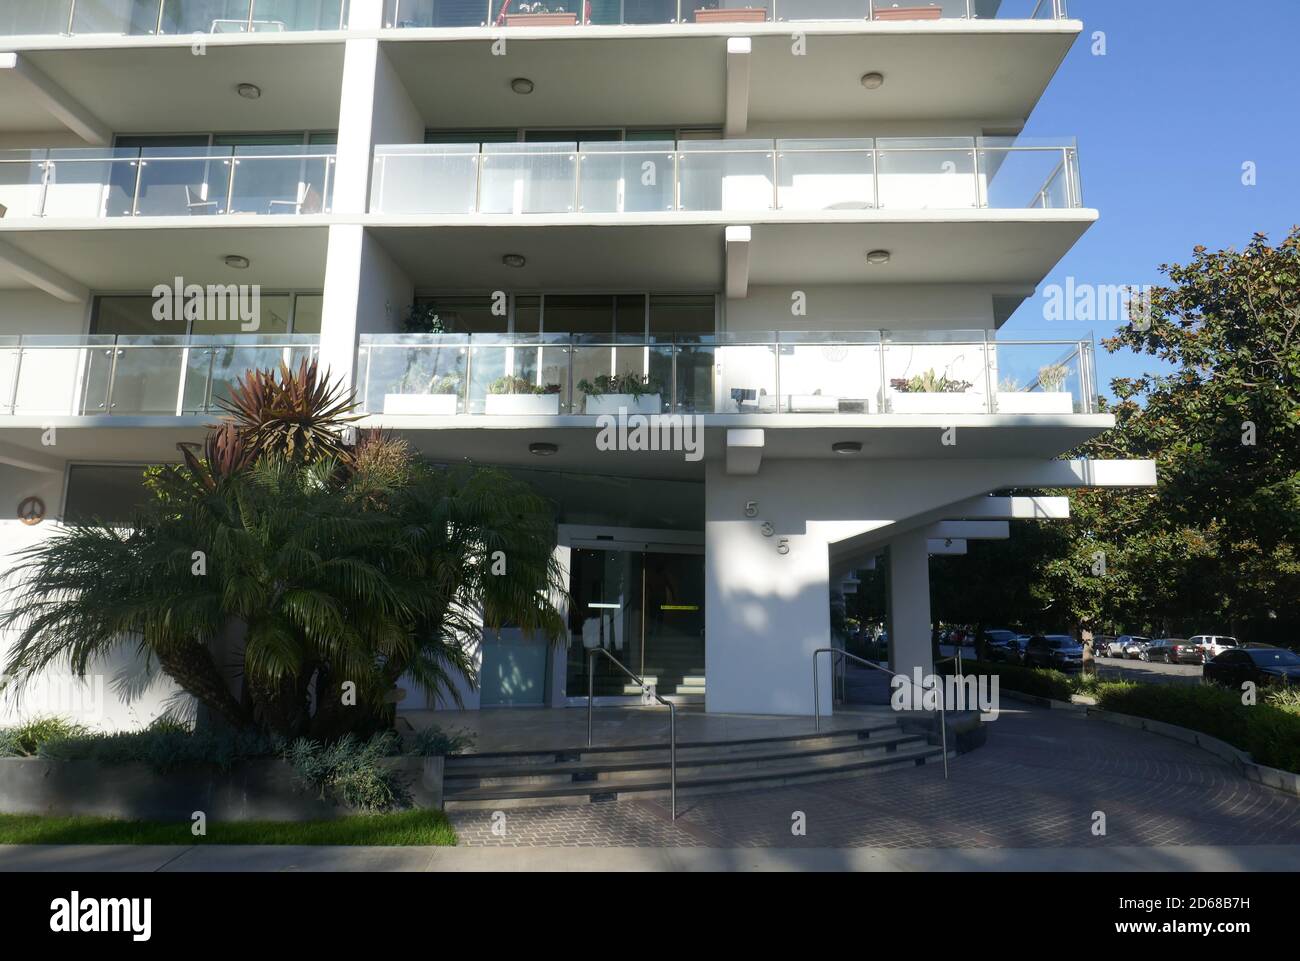 Santa Monica, California, USA 14th October 2020 A General view of atmosphere of Actor William Holden's Former and final home, the building he owned and where he died, at 535 Ocean Avenue in Santa Monica, California, USA. Photo by Barry King/Alamy Stock Photo Stock Photo